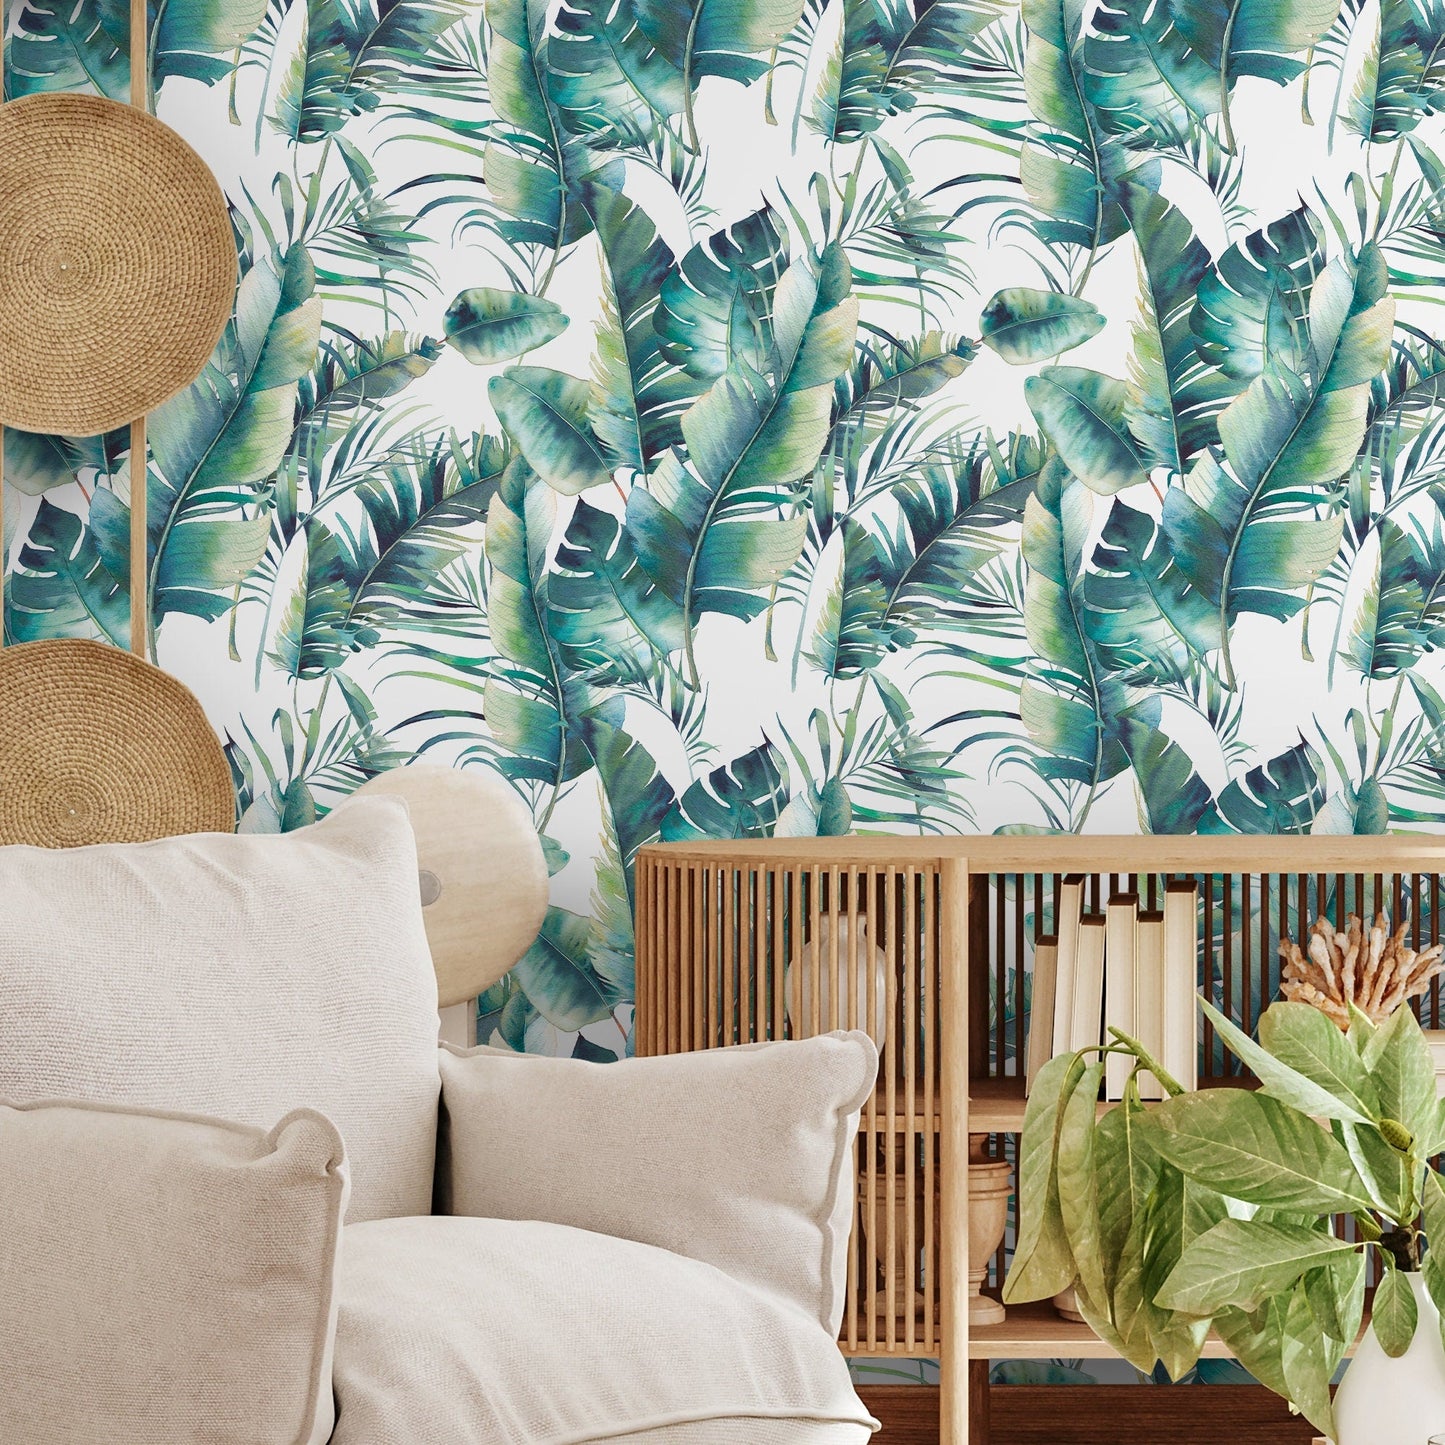 Temporary Wallpaper Tropical Wall Decor Leaves Removable Wallpaper Peel and Stick Wallpaper Wall Paper Removable - A512